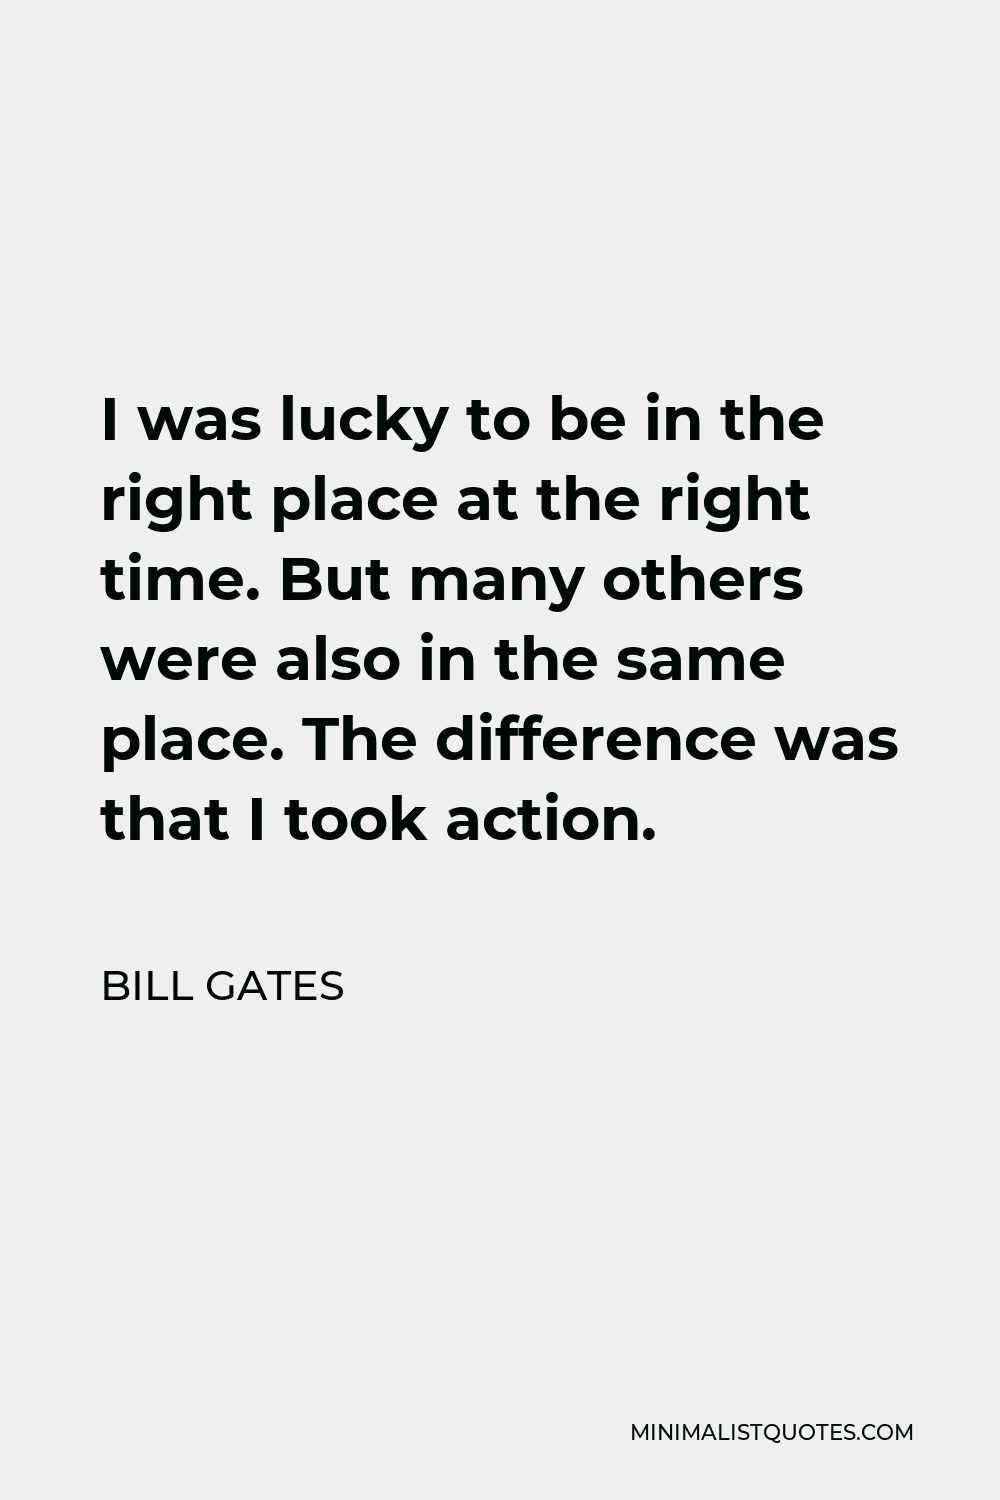 Bill Gates Quote - I was lucky to be in the right place at the right time. But many others were also in the same place. The difference was that I took action.